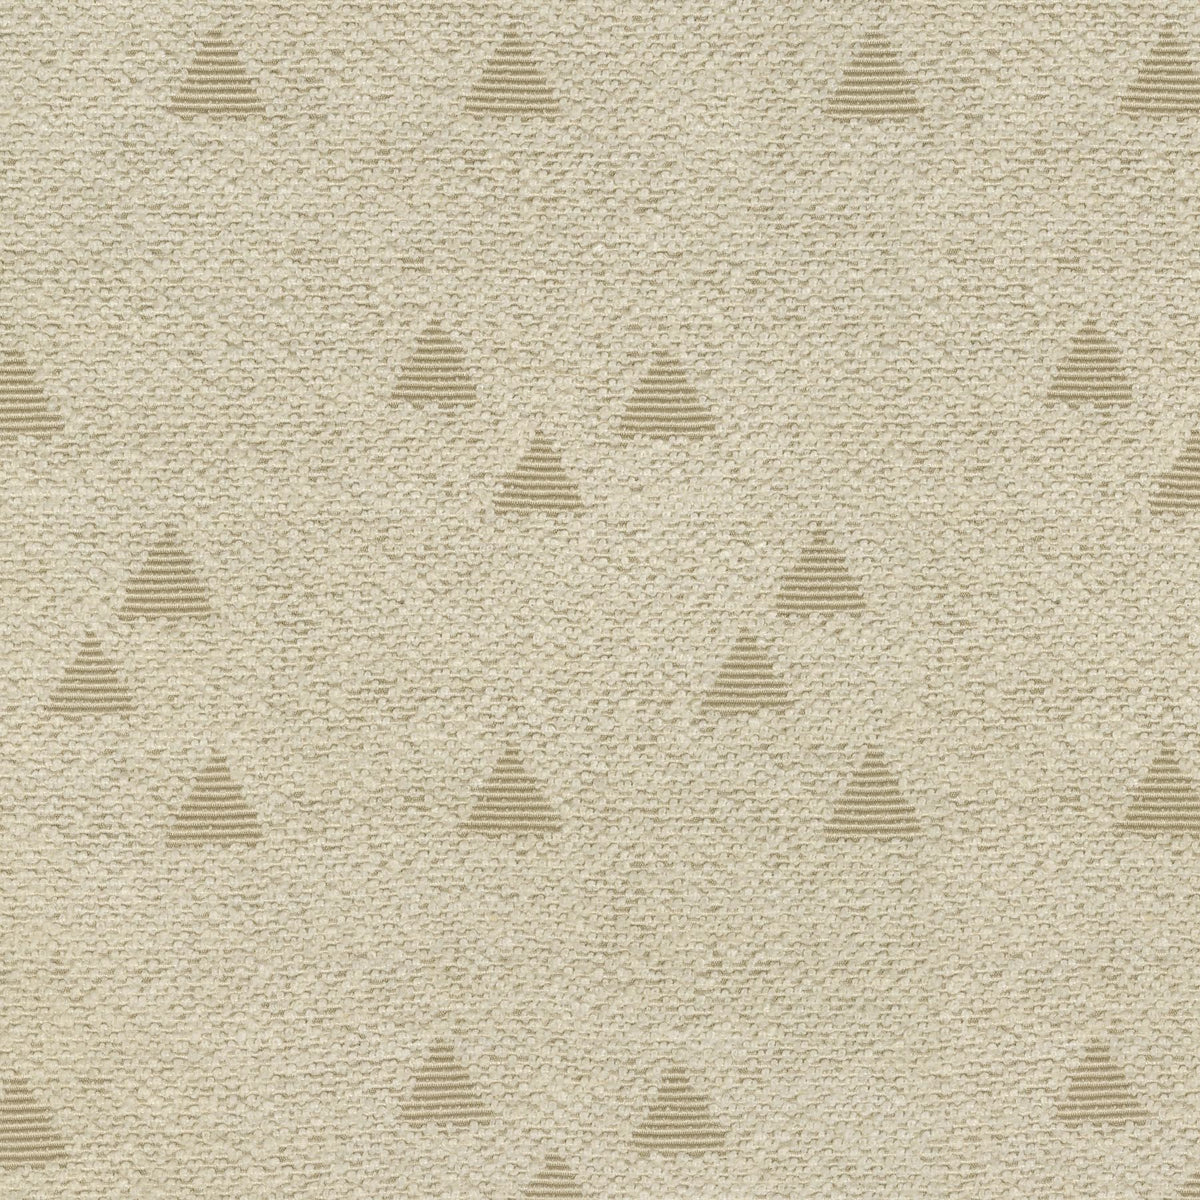 P/K Lifestyles Performance Altitude - Flax 411292 Upholstery Fabric